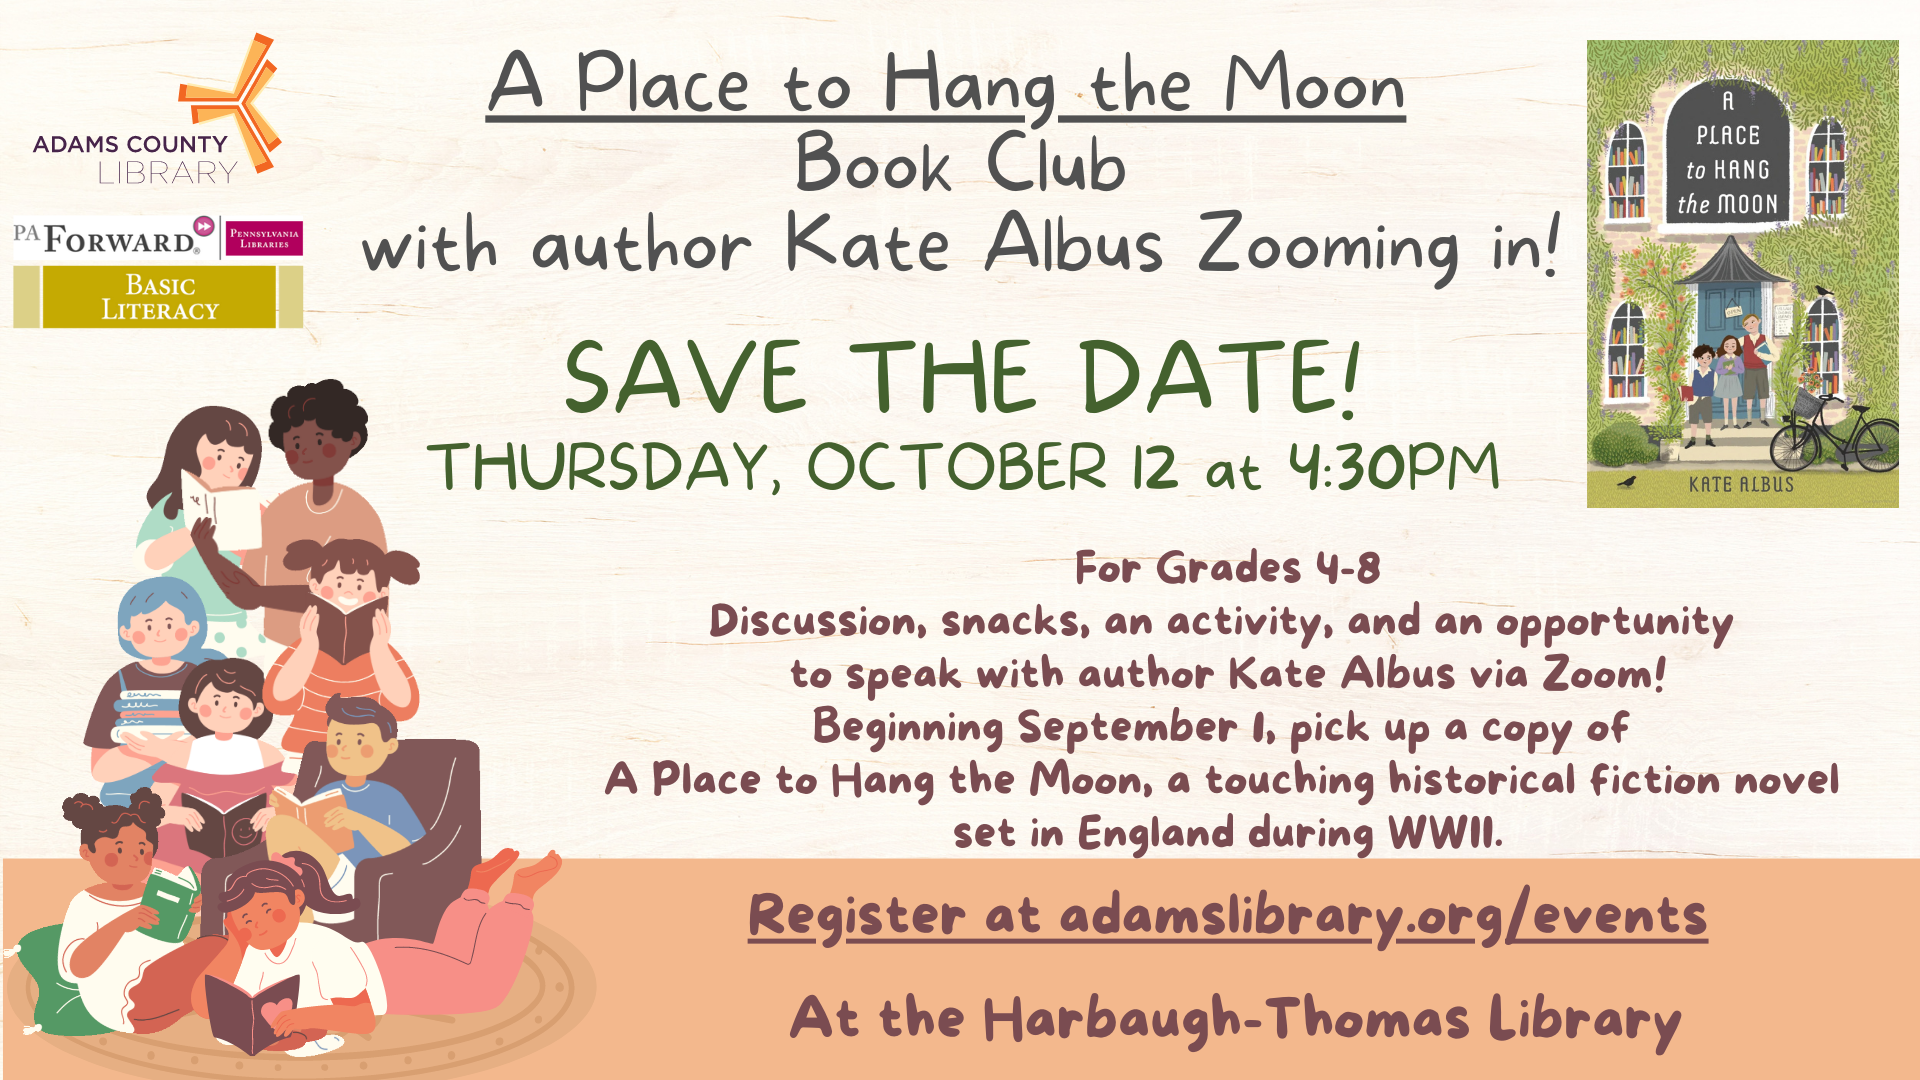 A Place to Hang the Moon Book Club